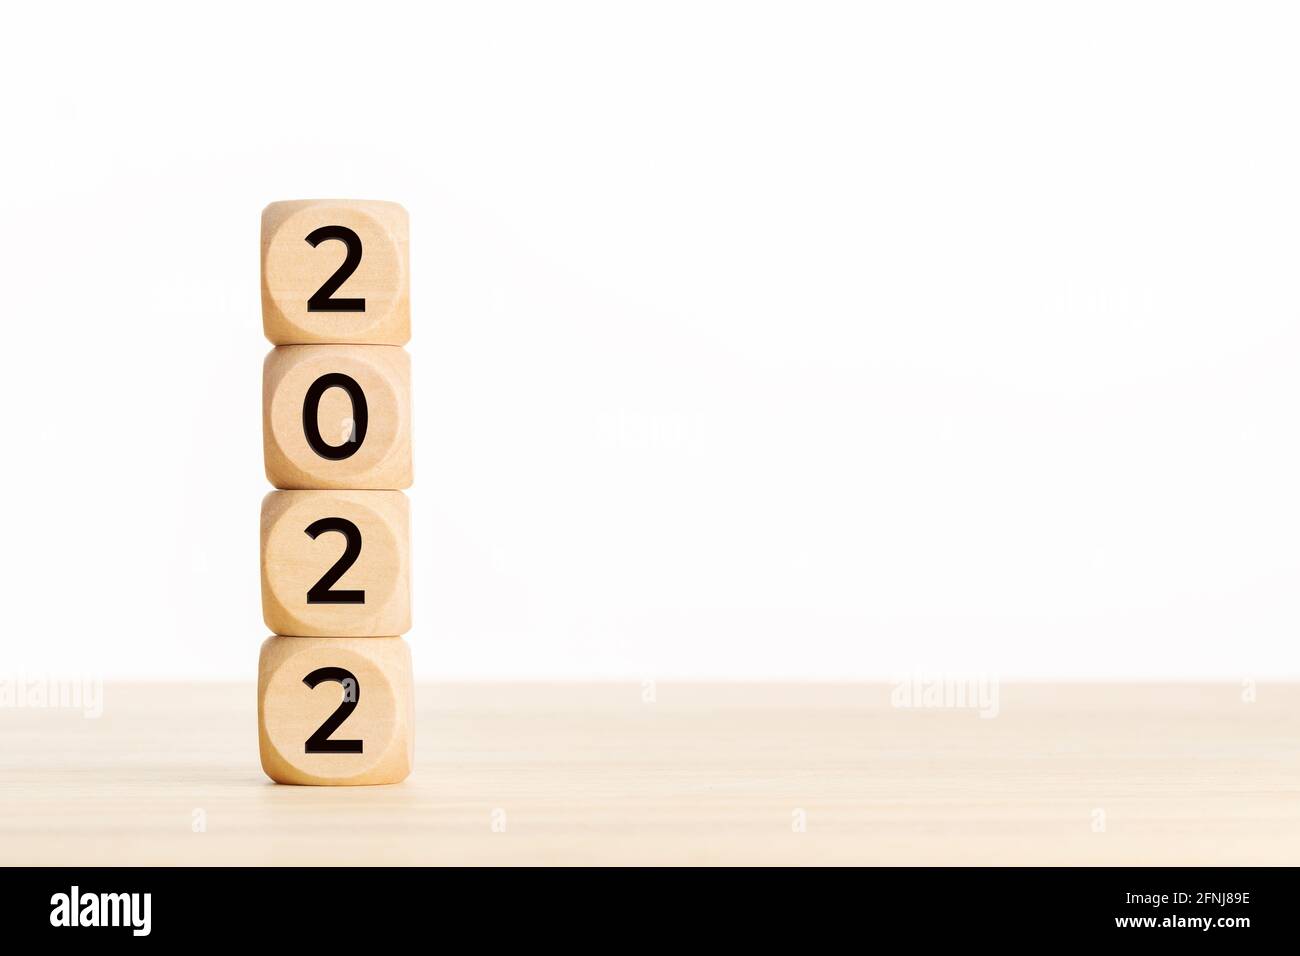 Wooden Blocks With number 2022. New year concept. Copy space. White background Stock Photo